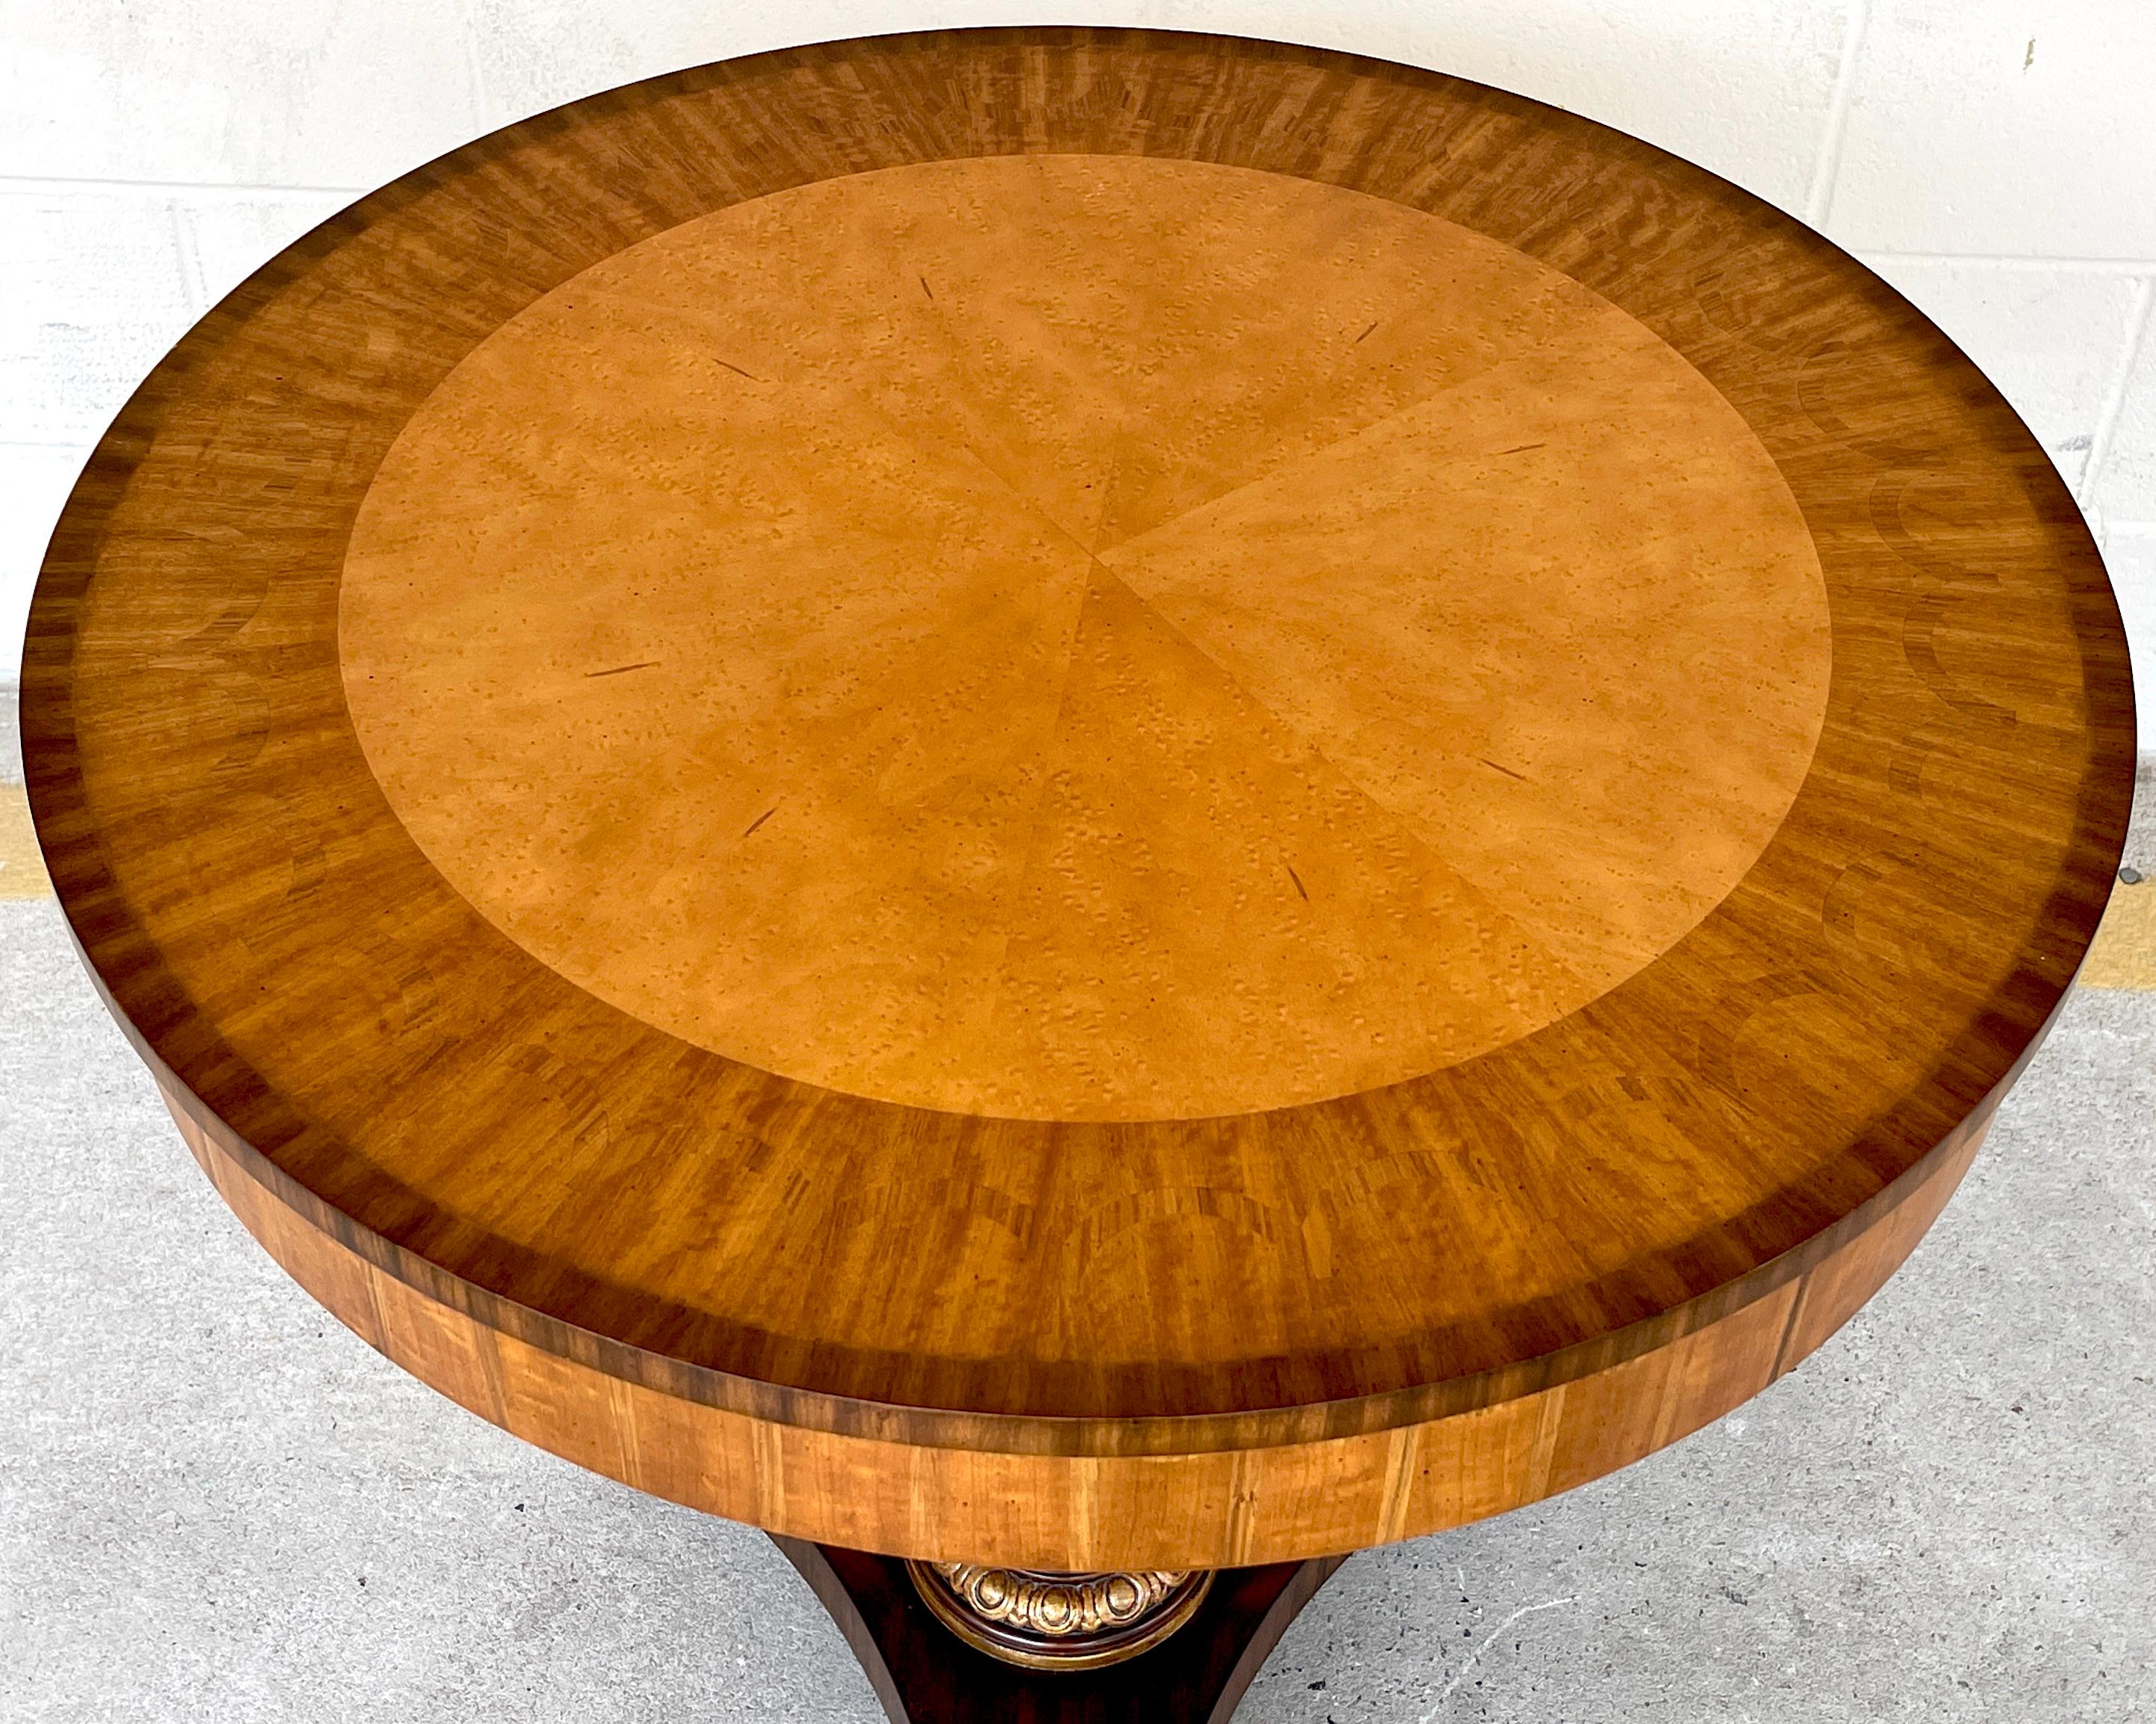 20th Century Neoclassical Style Inlaid Side Table with Bronze Feet, by Maitland-Smith For Sale